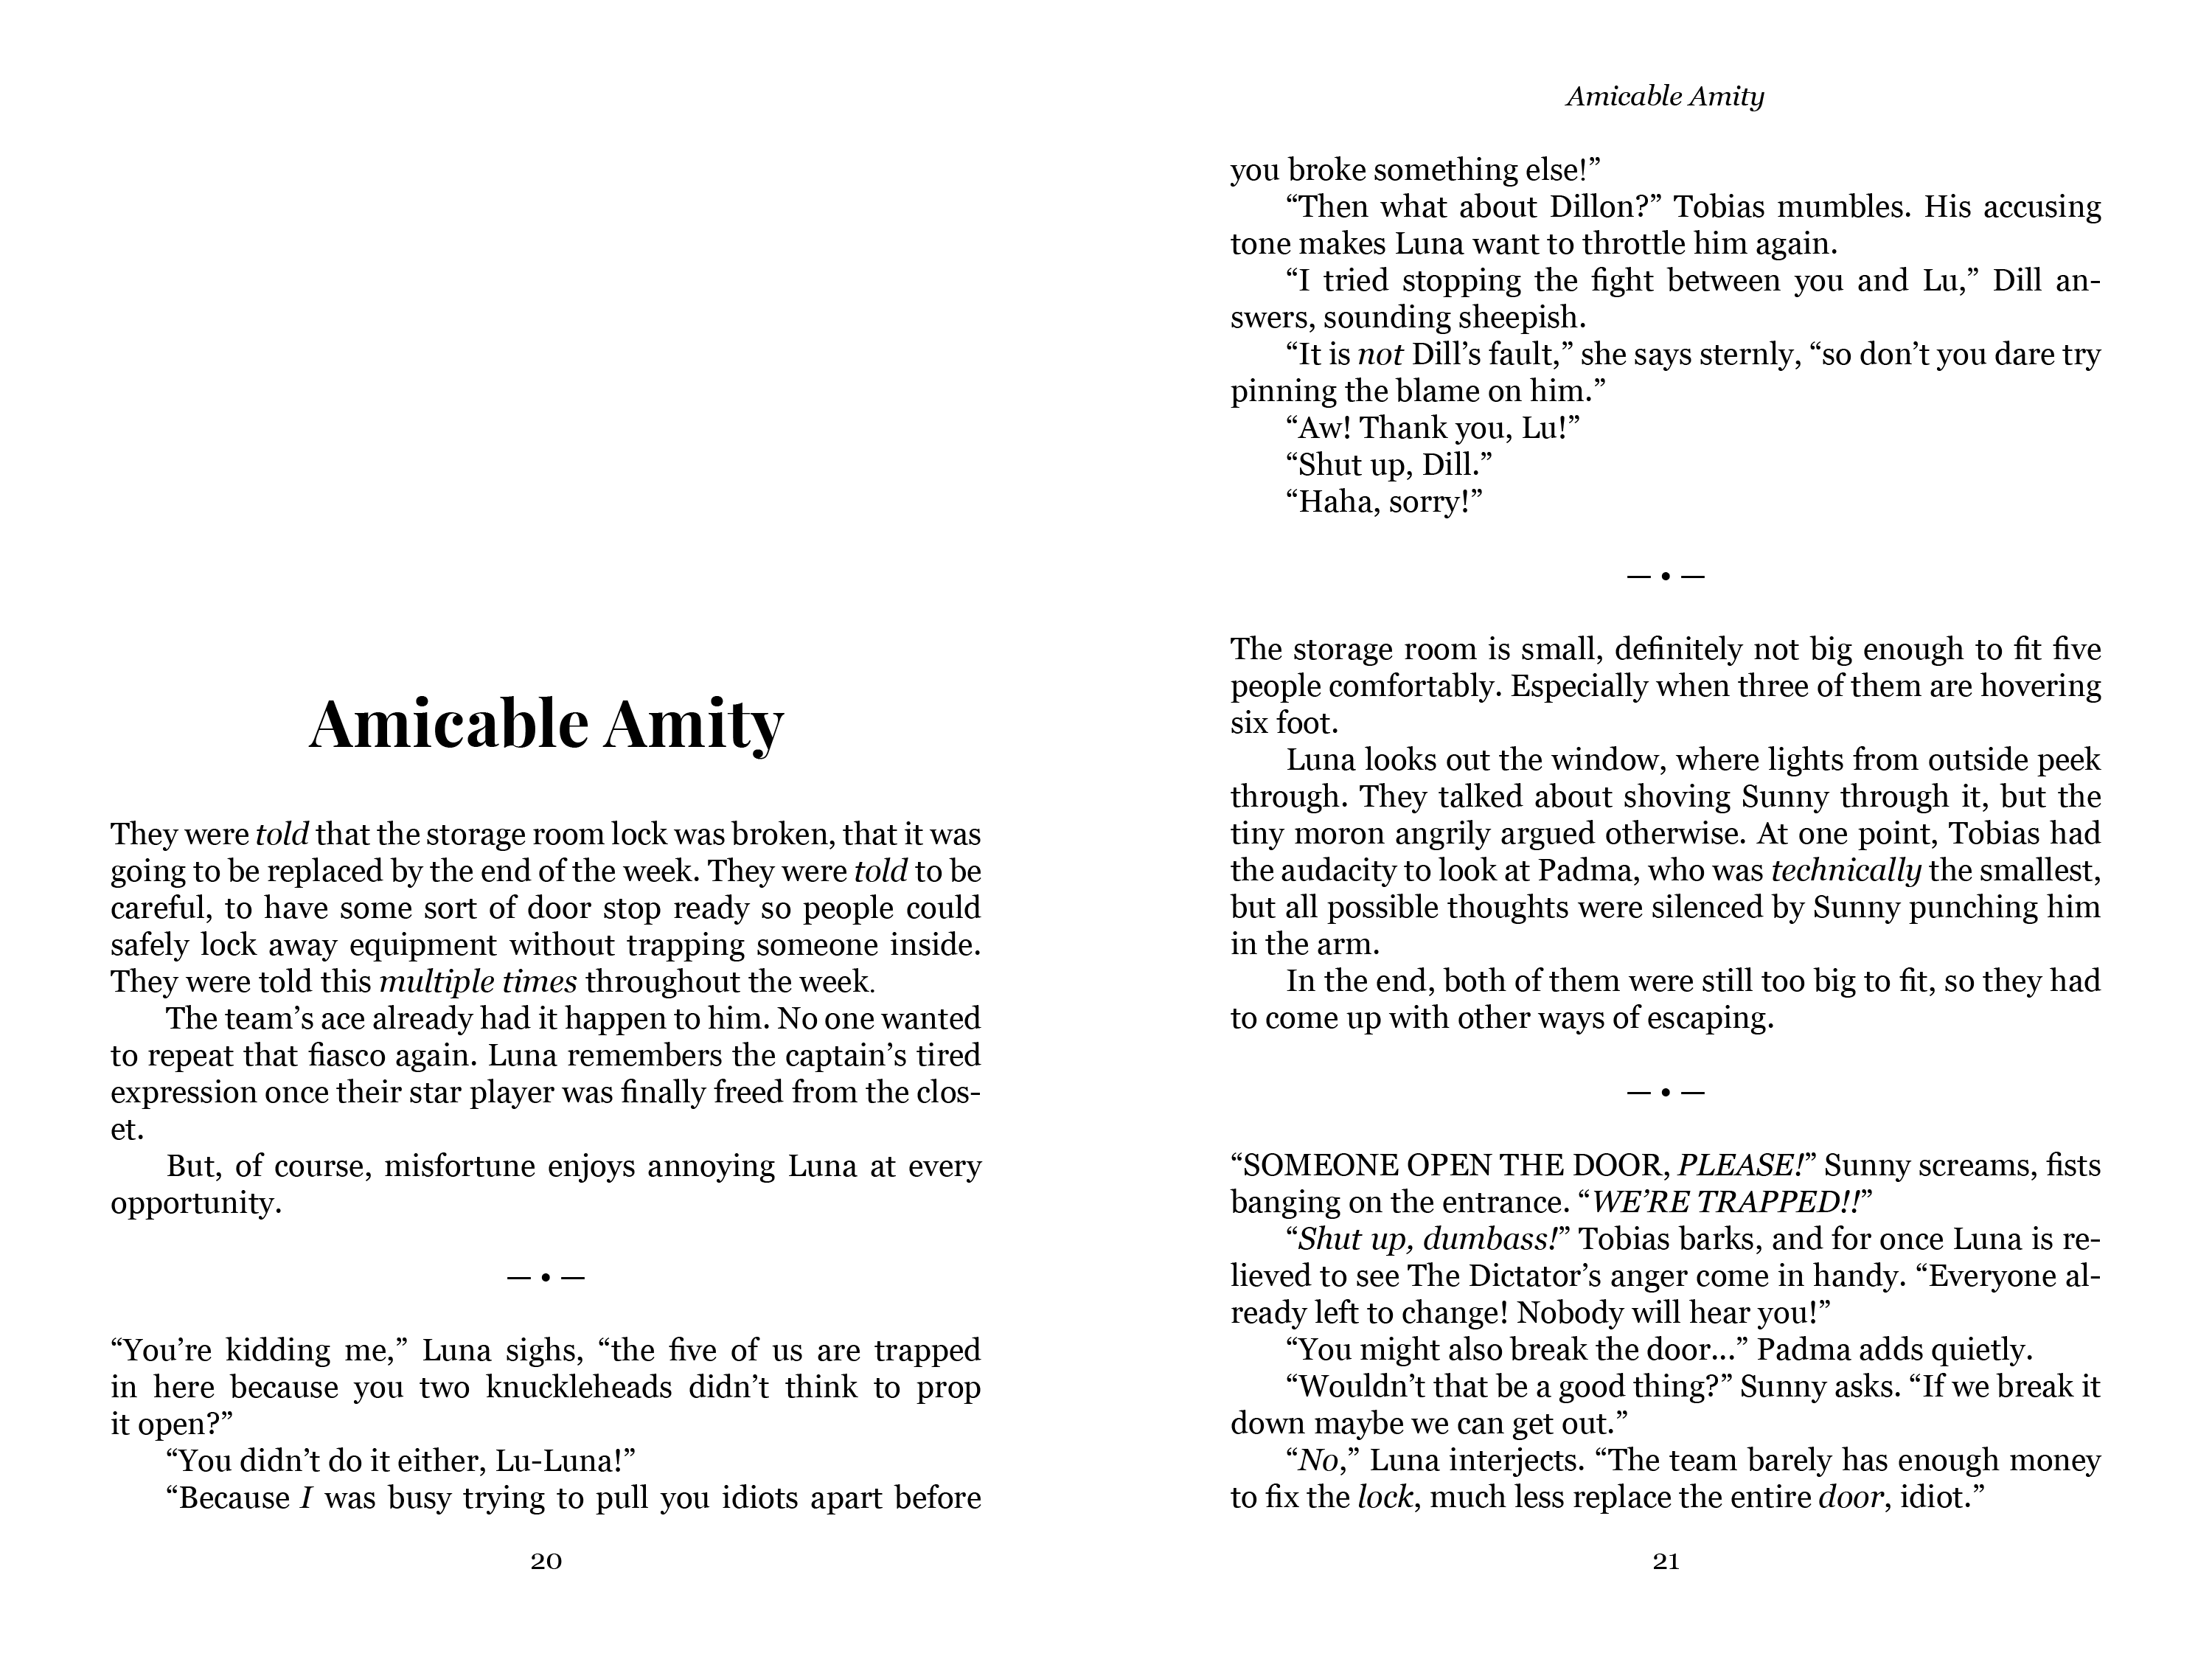 A digital version of a two-page spread from the Amicable Amity chapter.